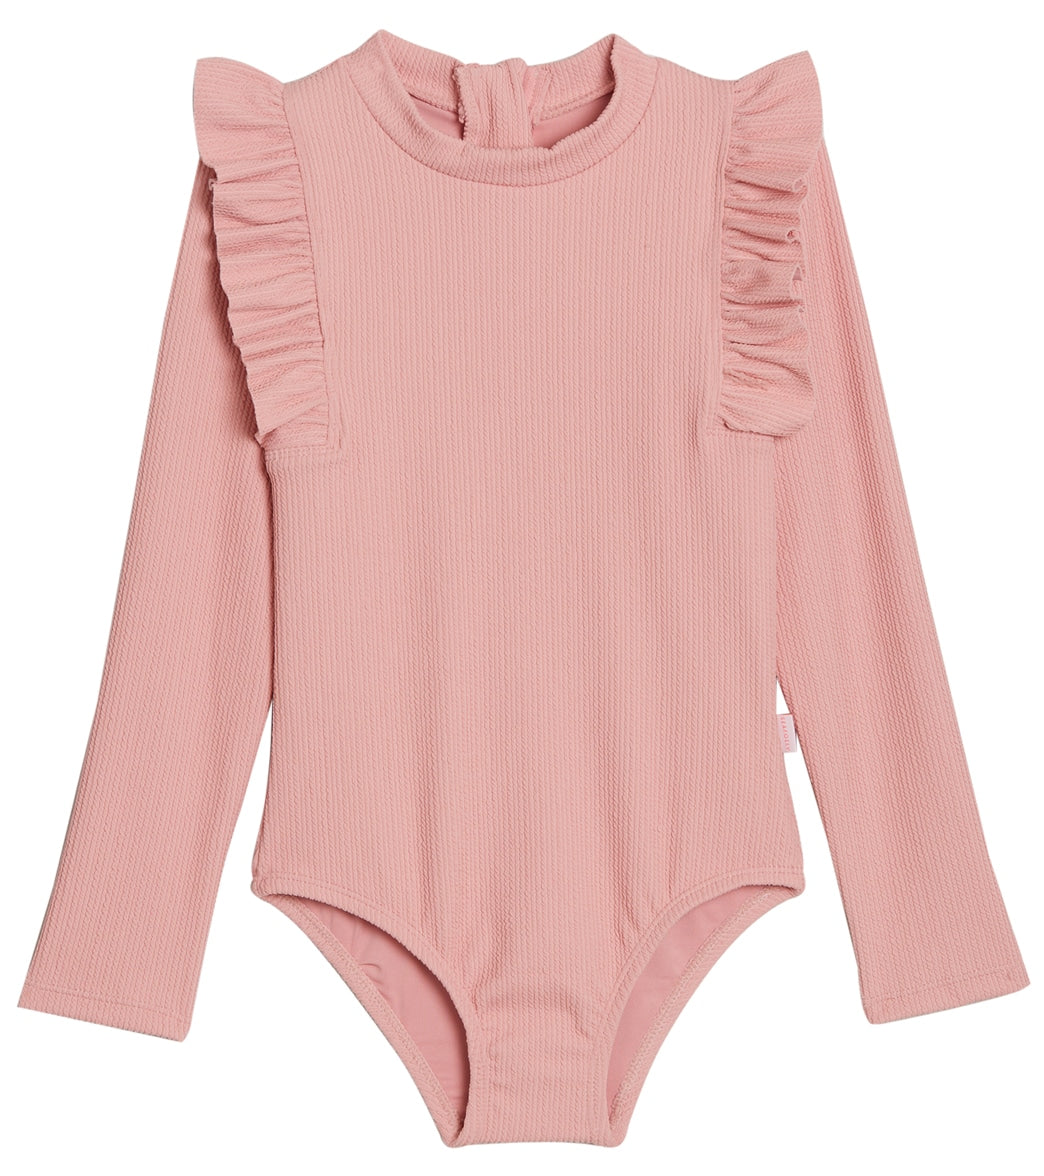 Seafolly Girls Essential Long Sleeve One Piece Swimsuit (Baby, Toddler, Little Kid)